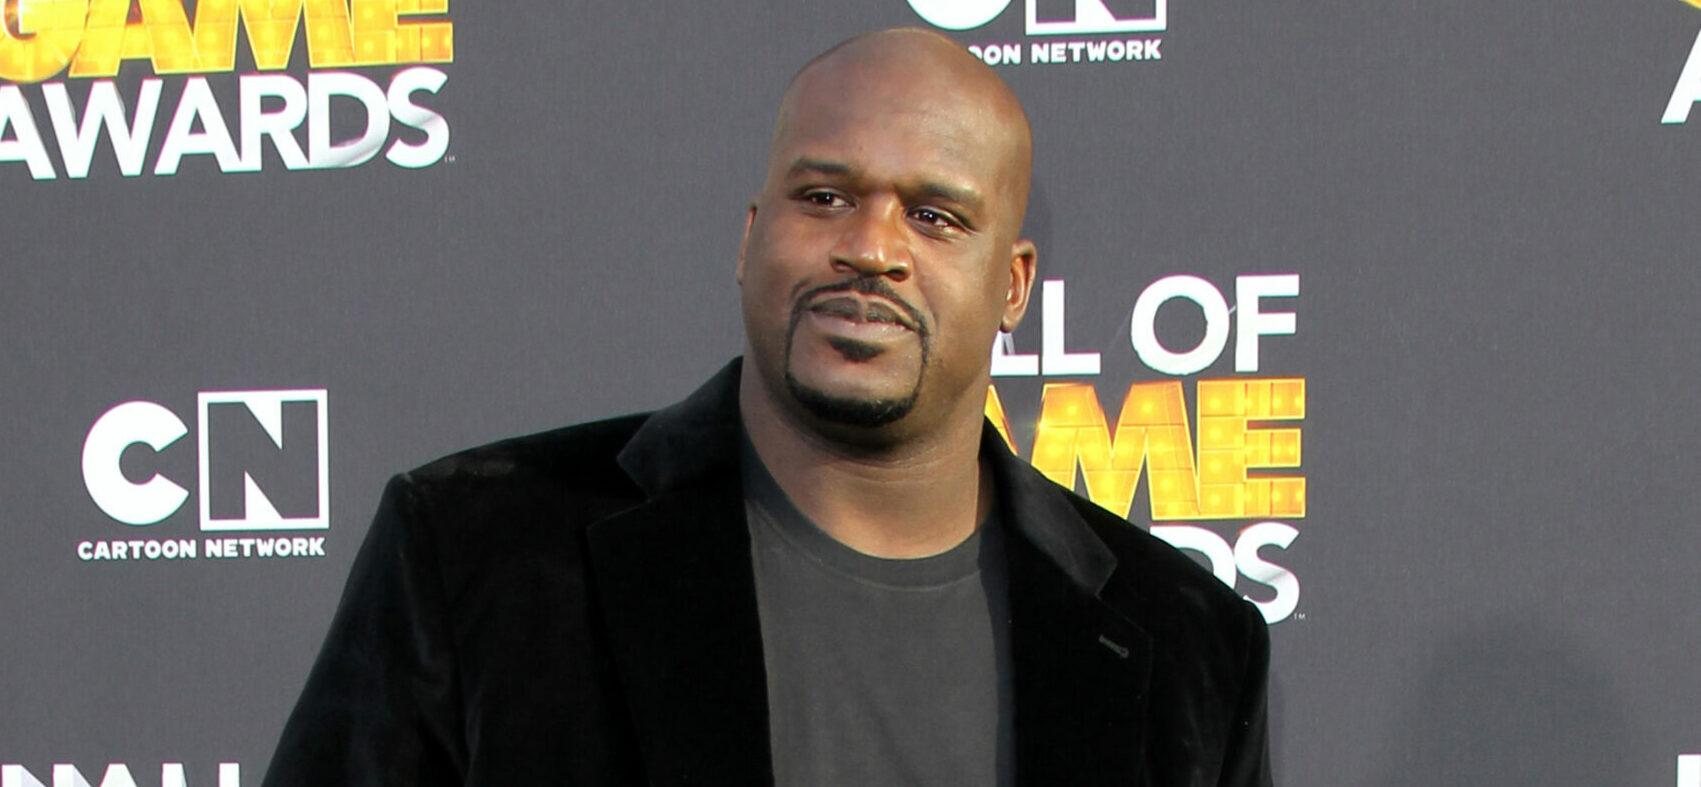 Shaquille O’Neal To Help Shooting Victims With Proceeds From Buffalo Gig